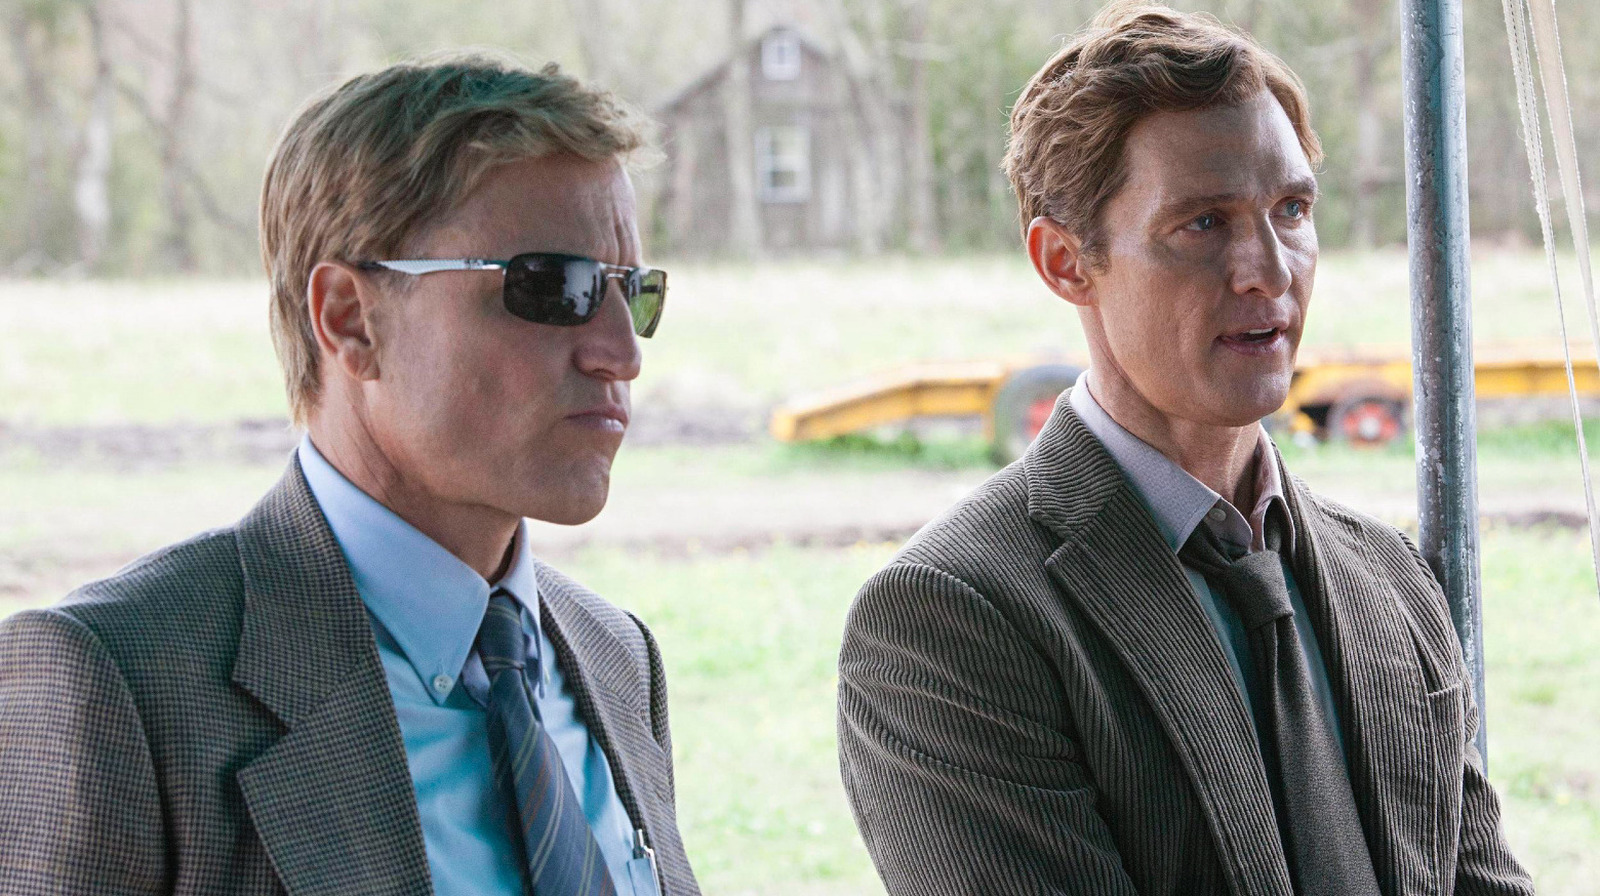 True Detective Season 4: A Divisive Legacy and the Quest for Connection